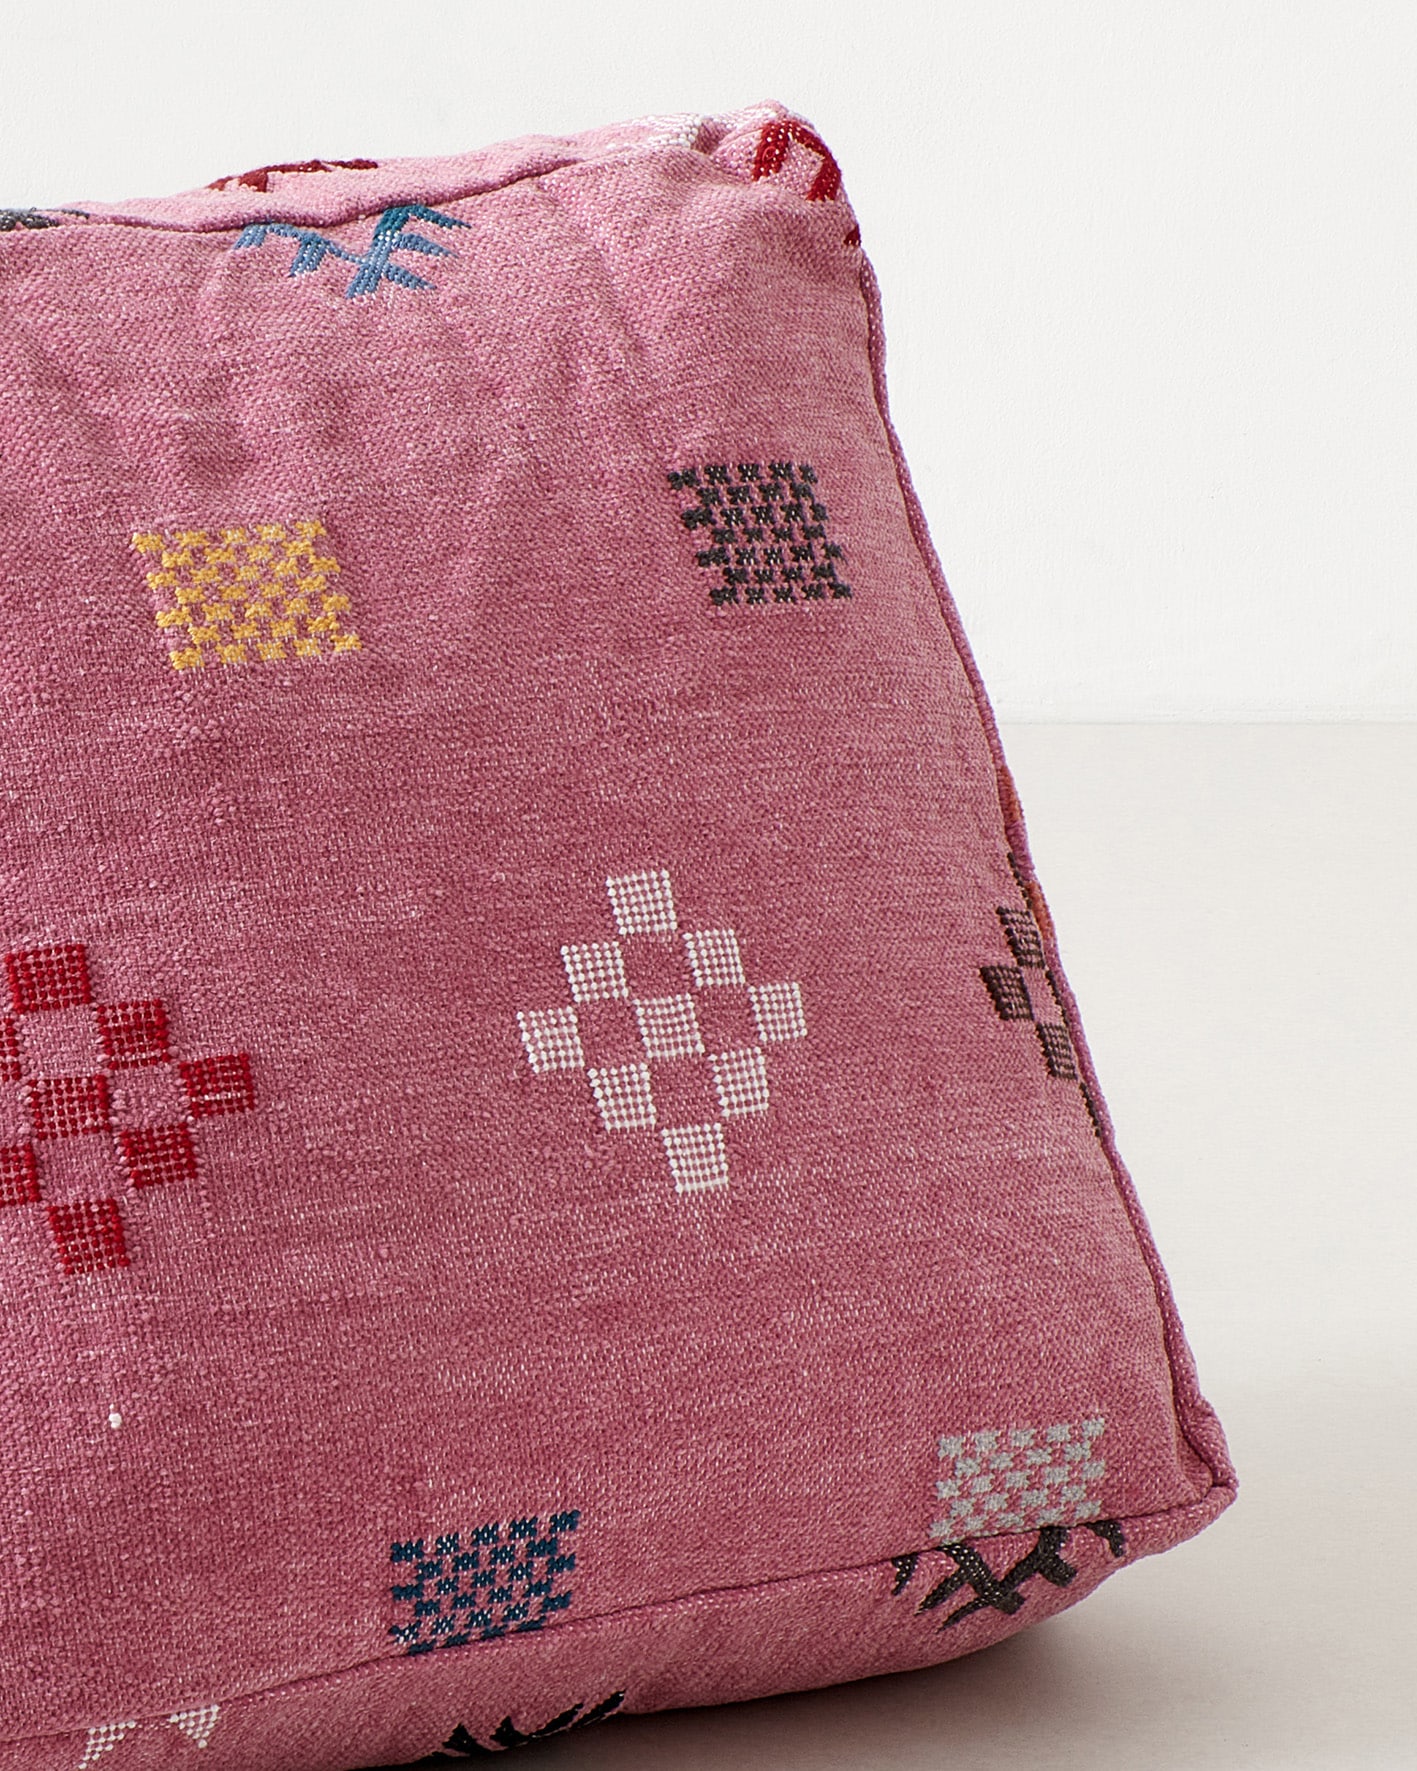 Pink pouf with colourful pictograms, close